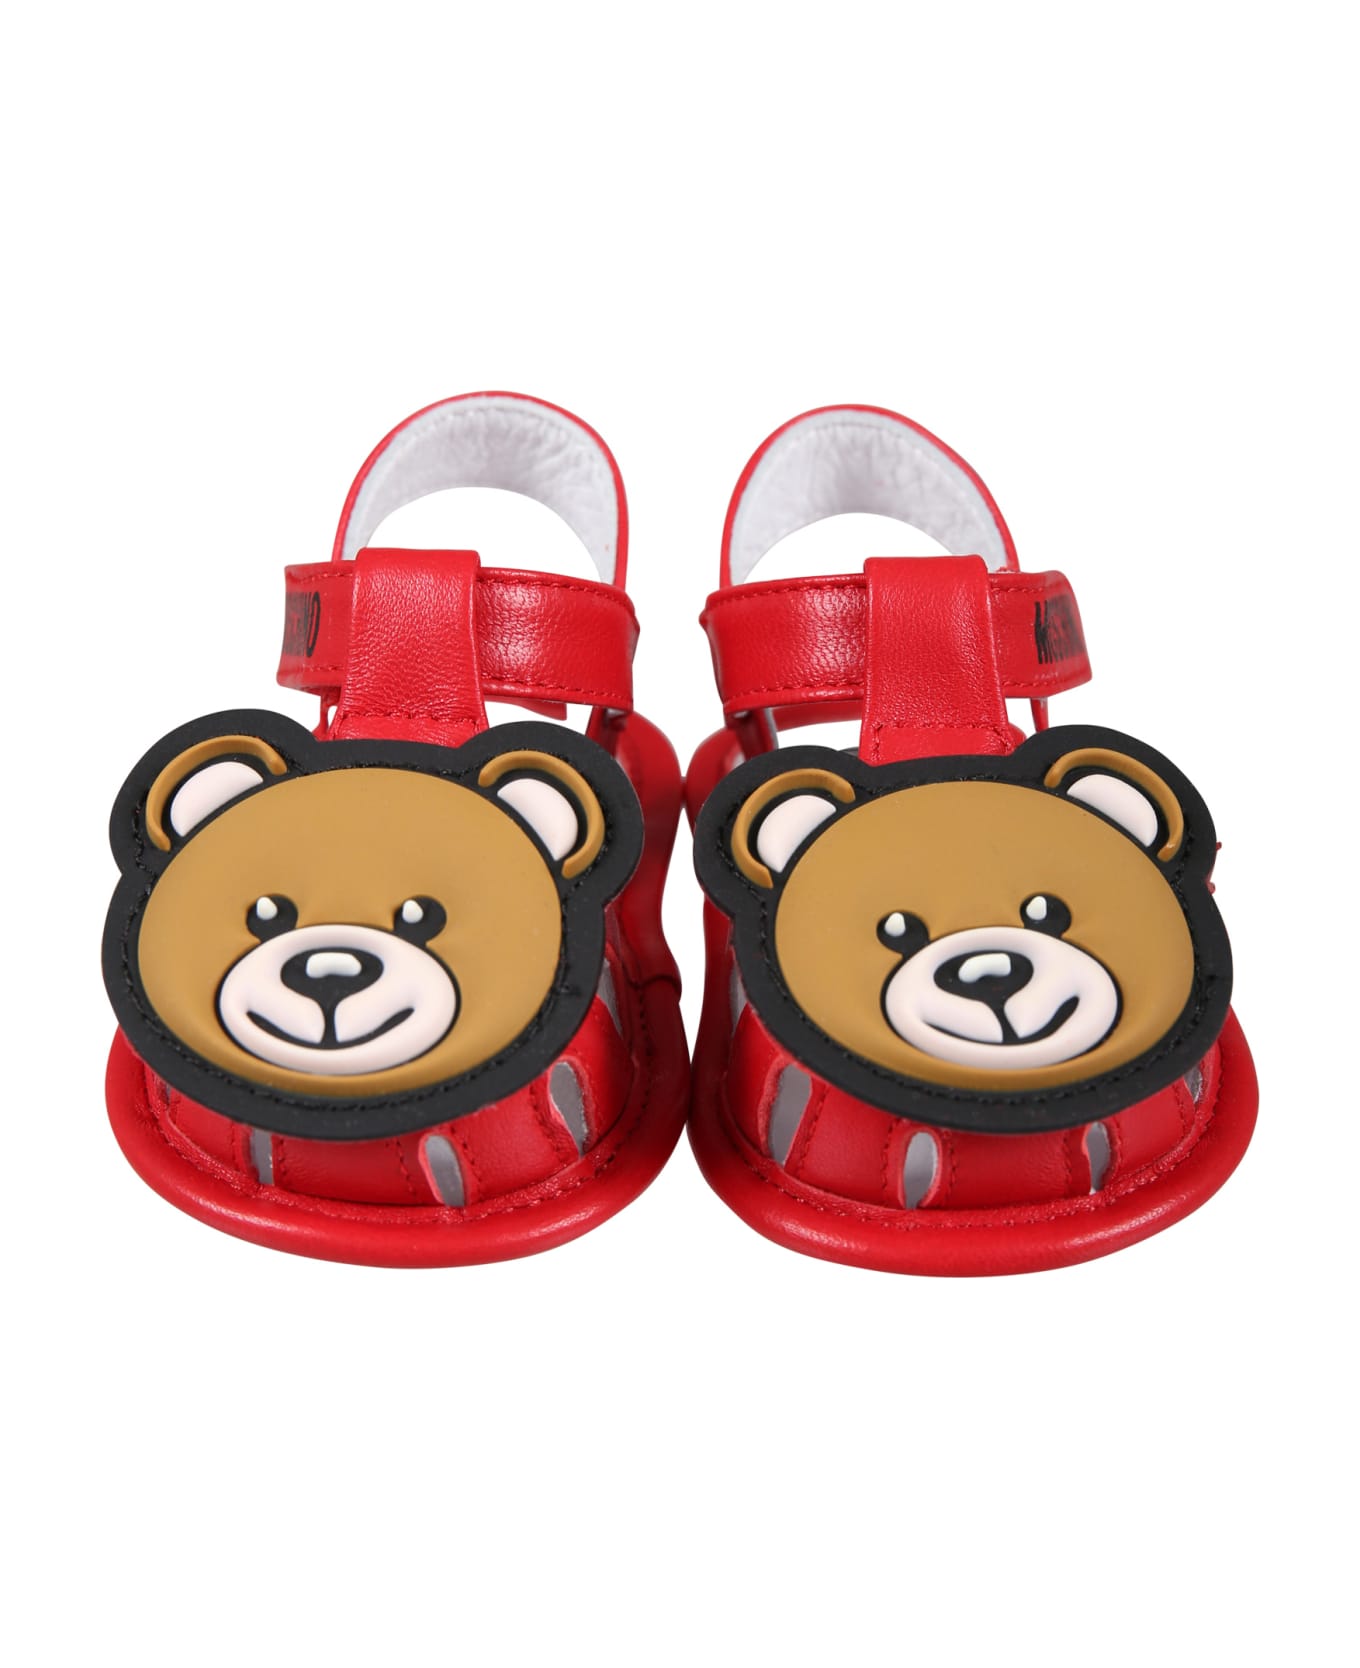 Moschino Red Sandals For Baby Kids With Teddy Bear And Logo - Red